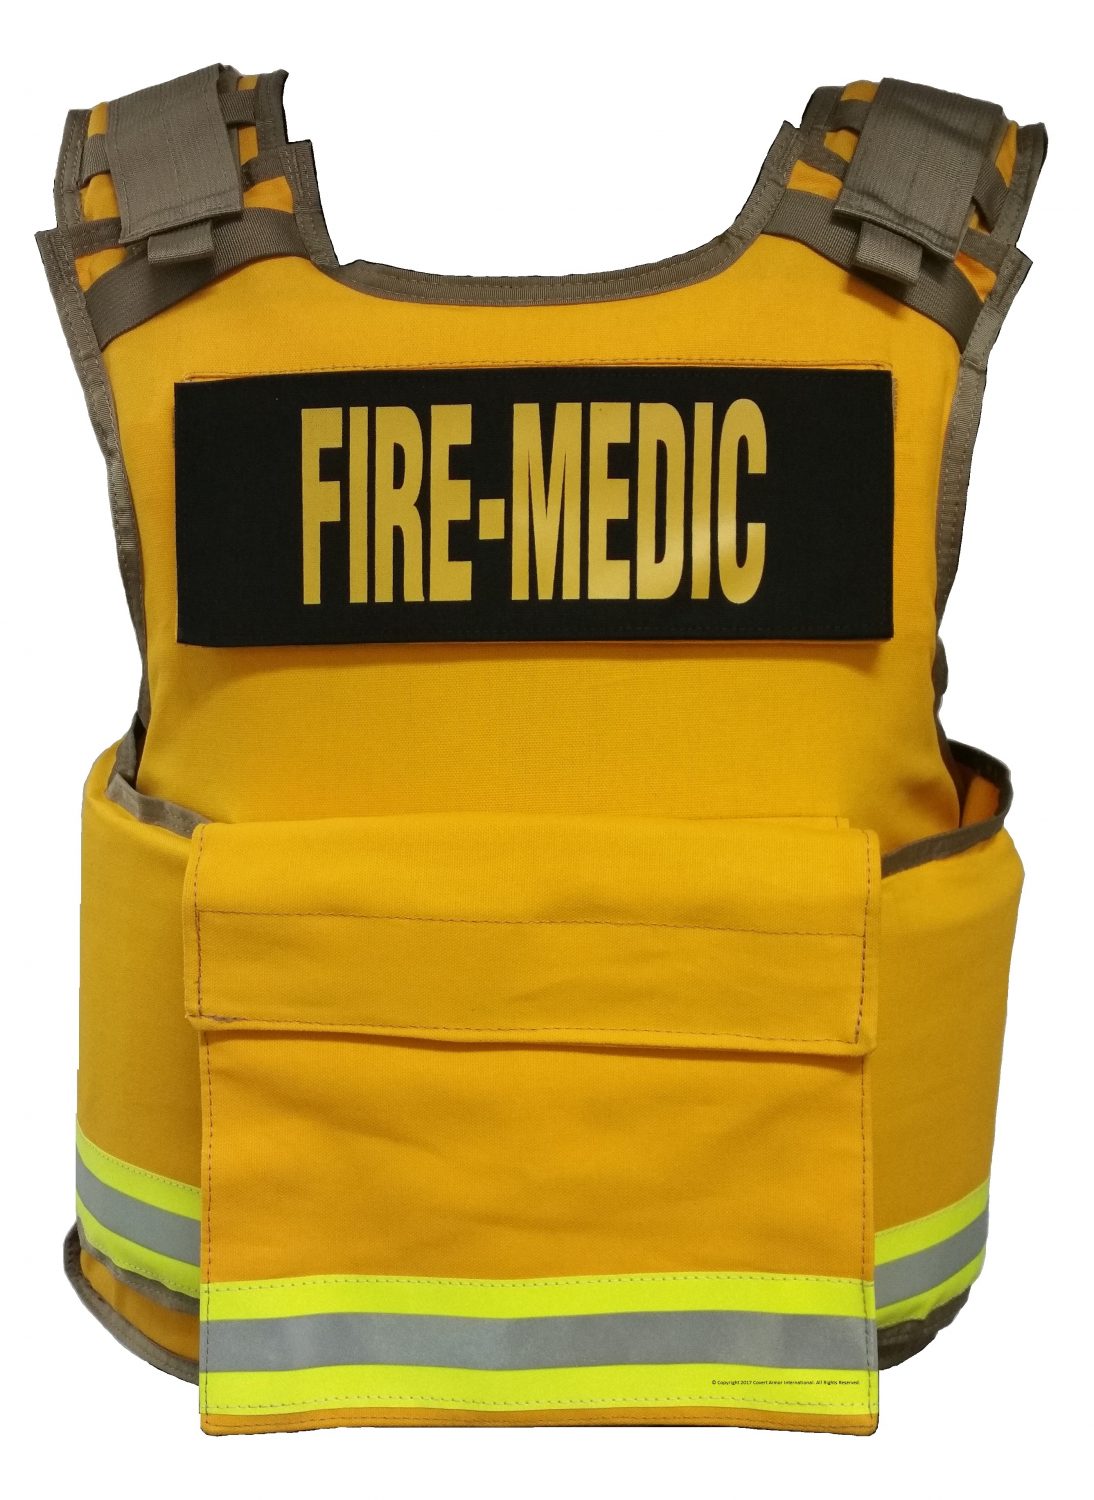 F1-first ever 1-size-fits ballistic vest for fire, ems rescue task force